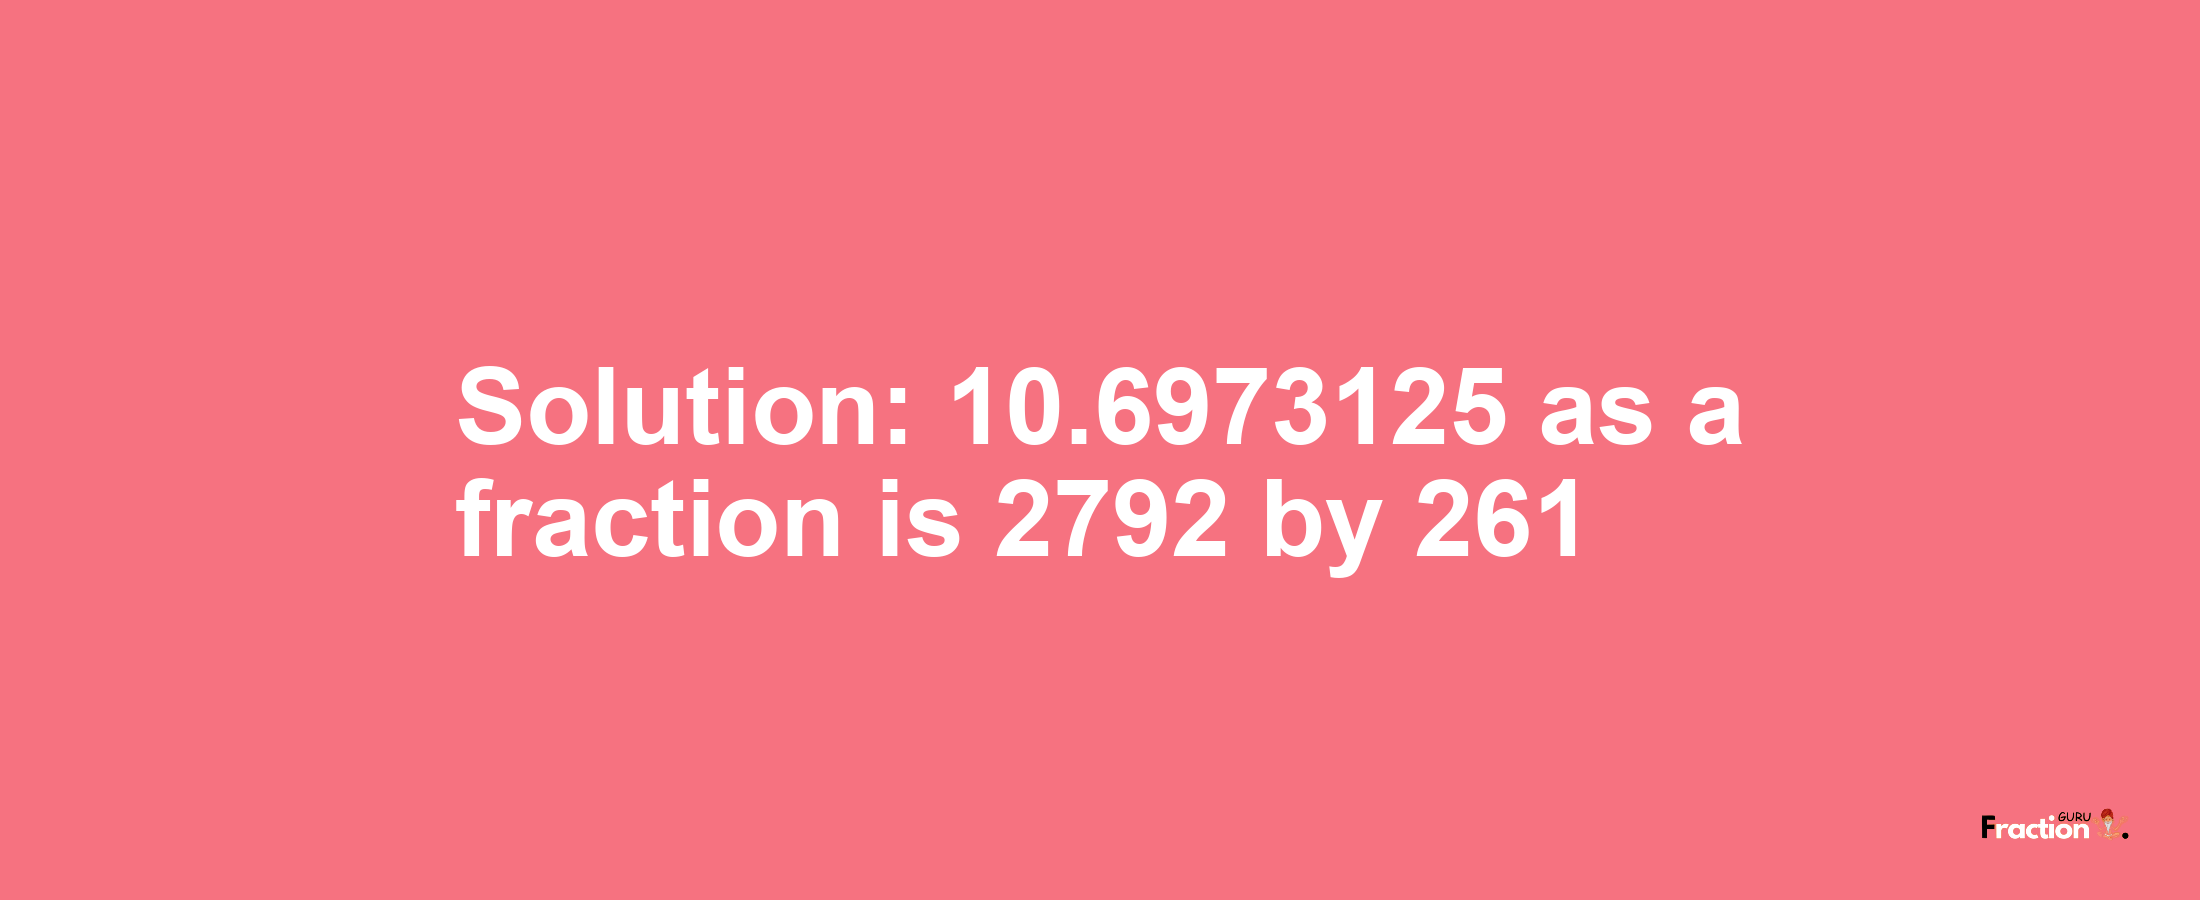 Solution:10.6973125 as a fraction is 2792/261